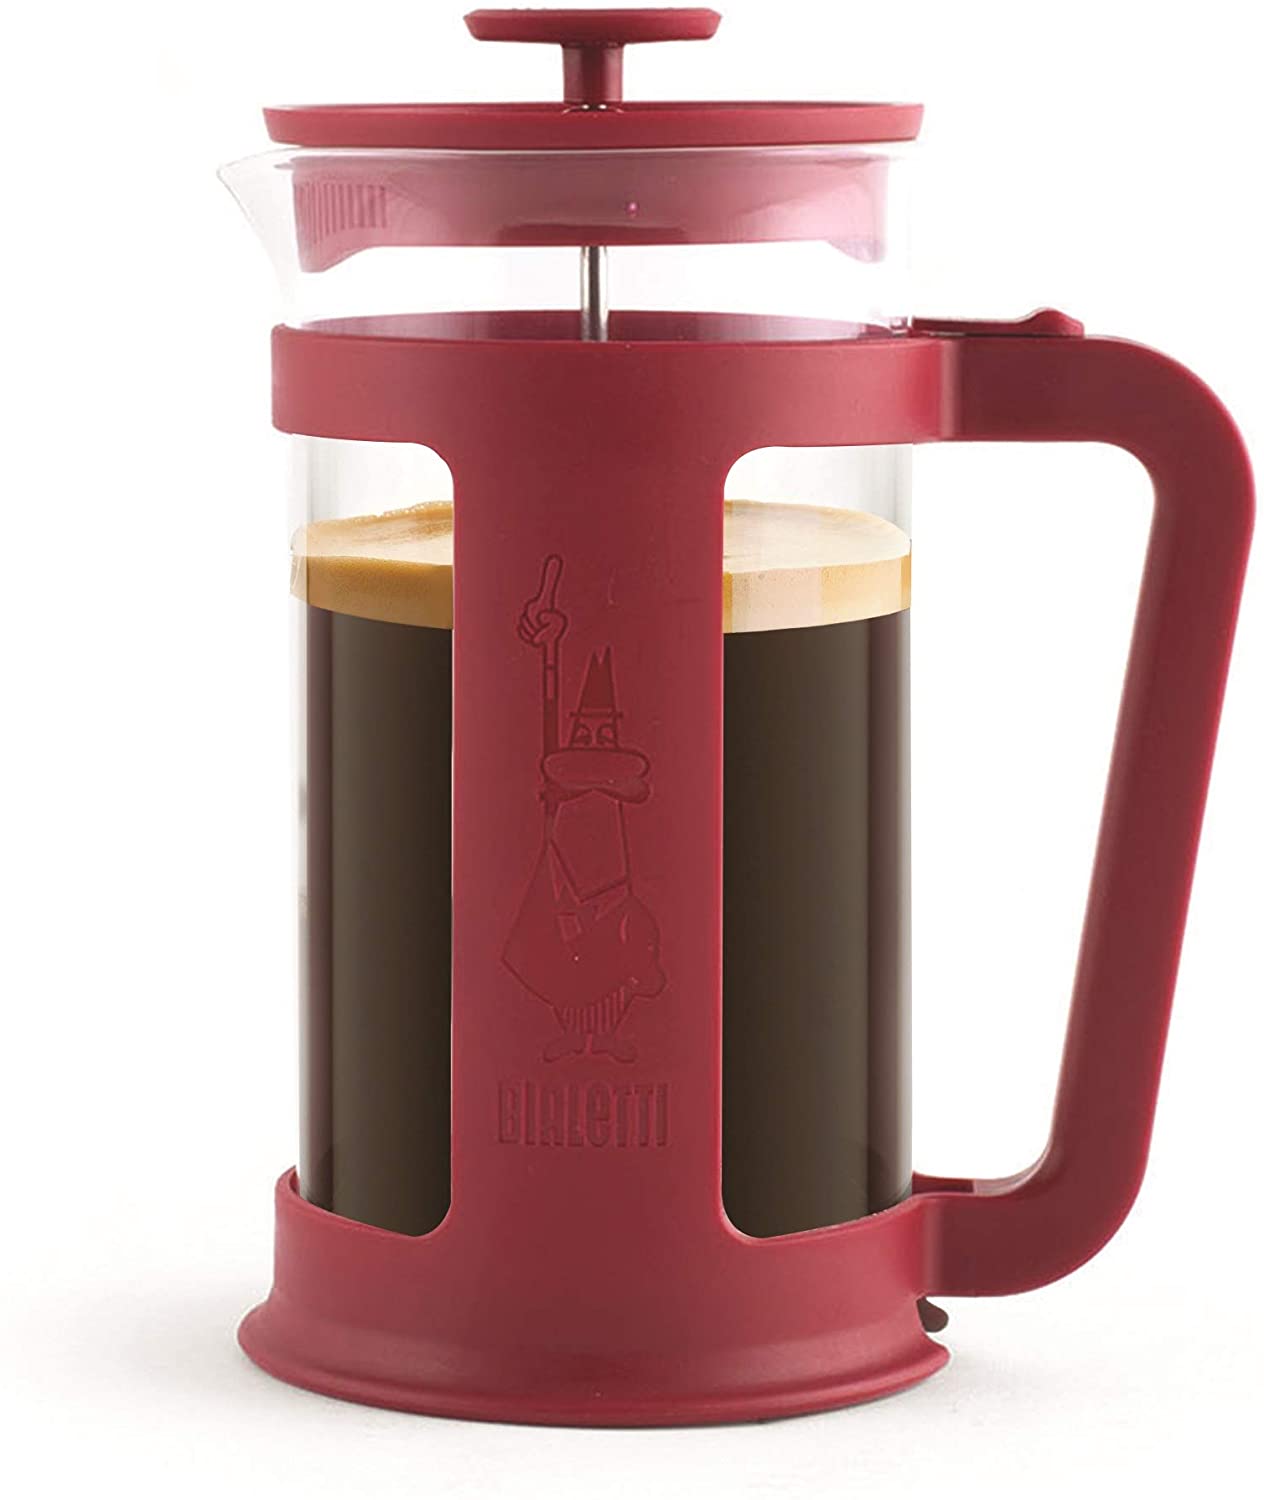 Bialetti French Press Smart Coffee Maker Red One Size